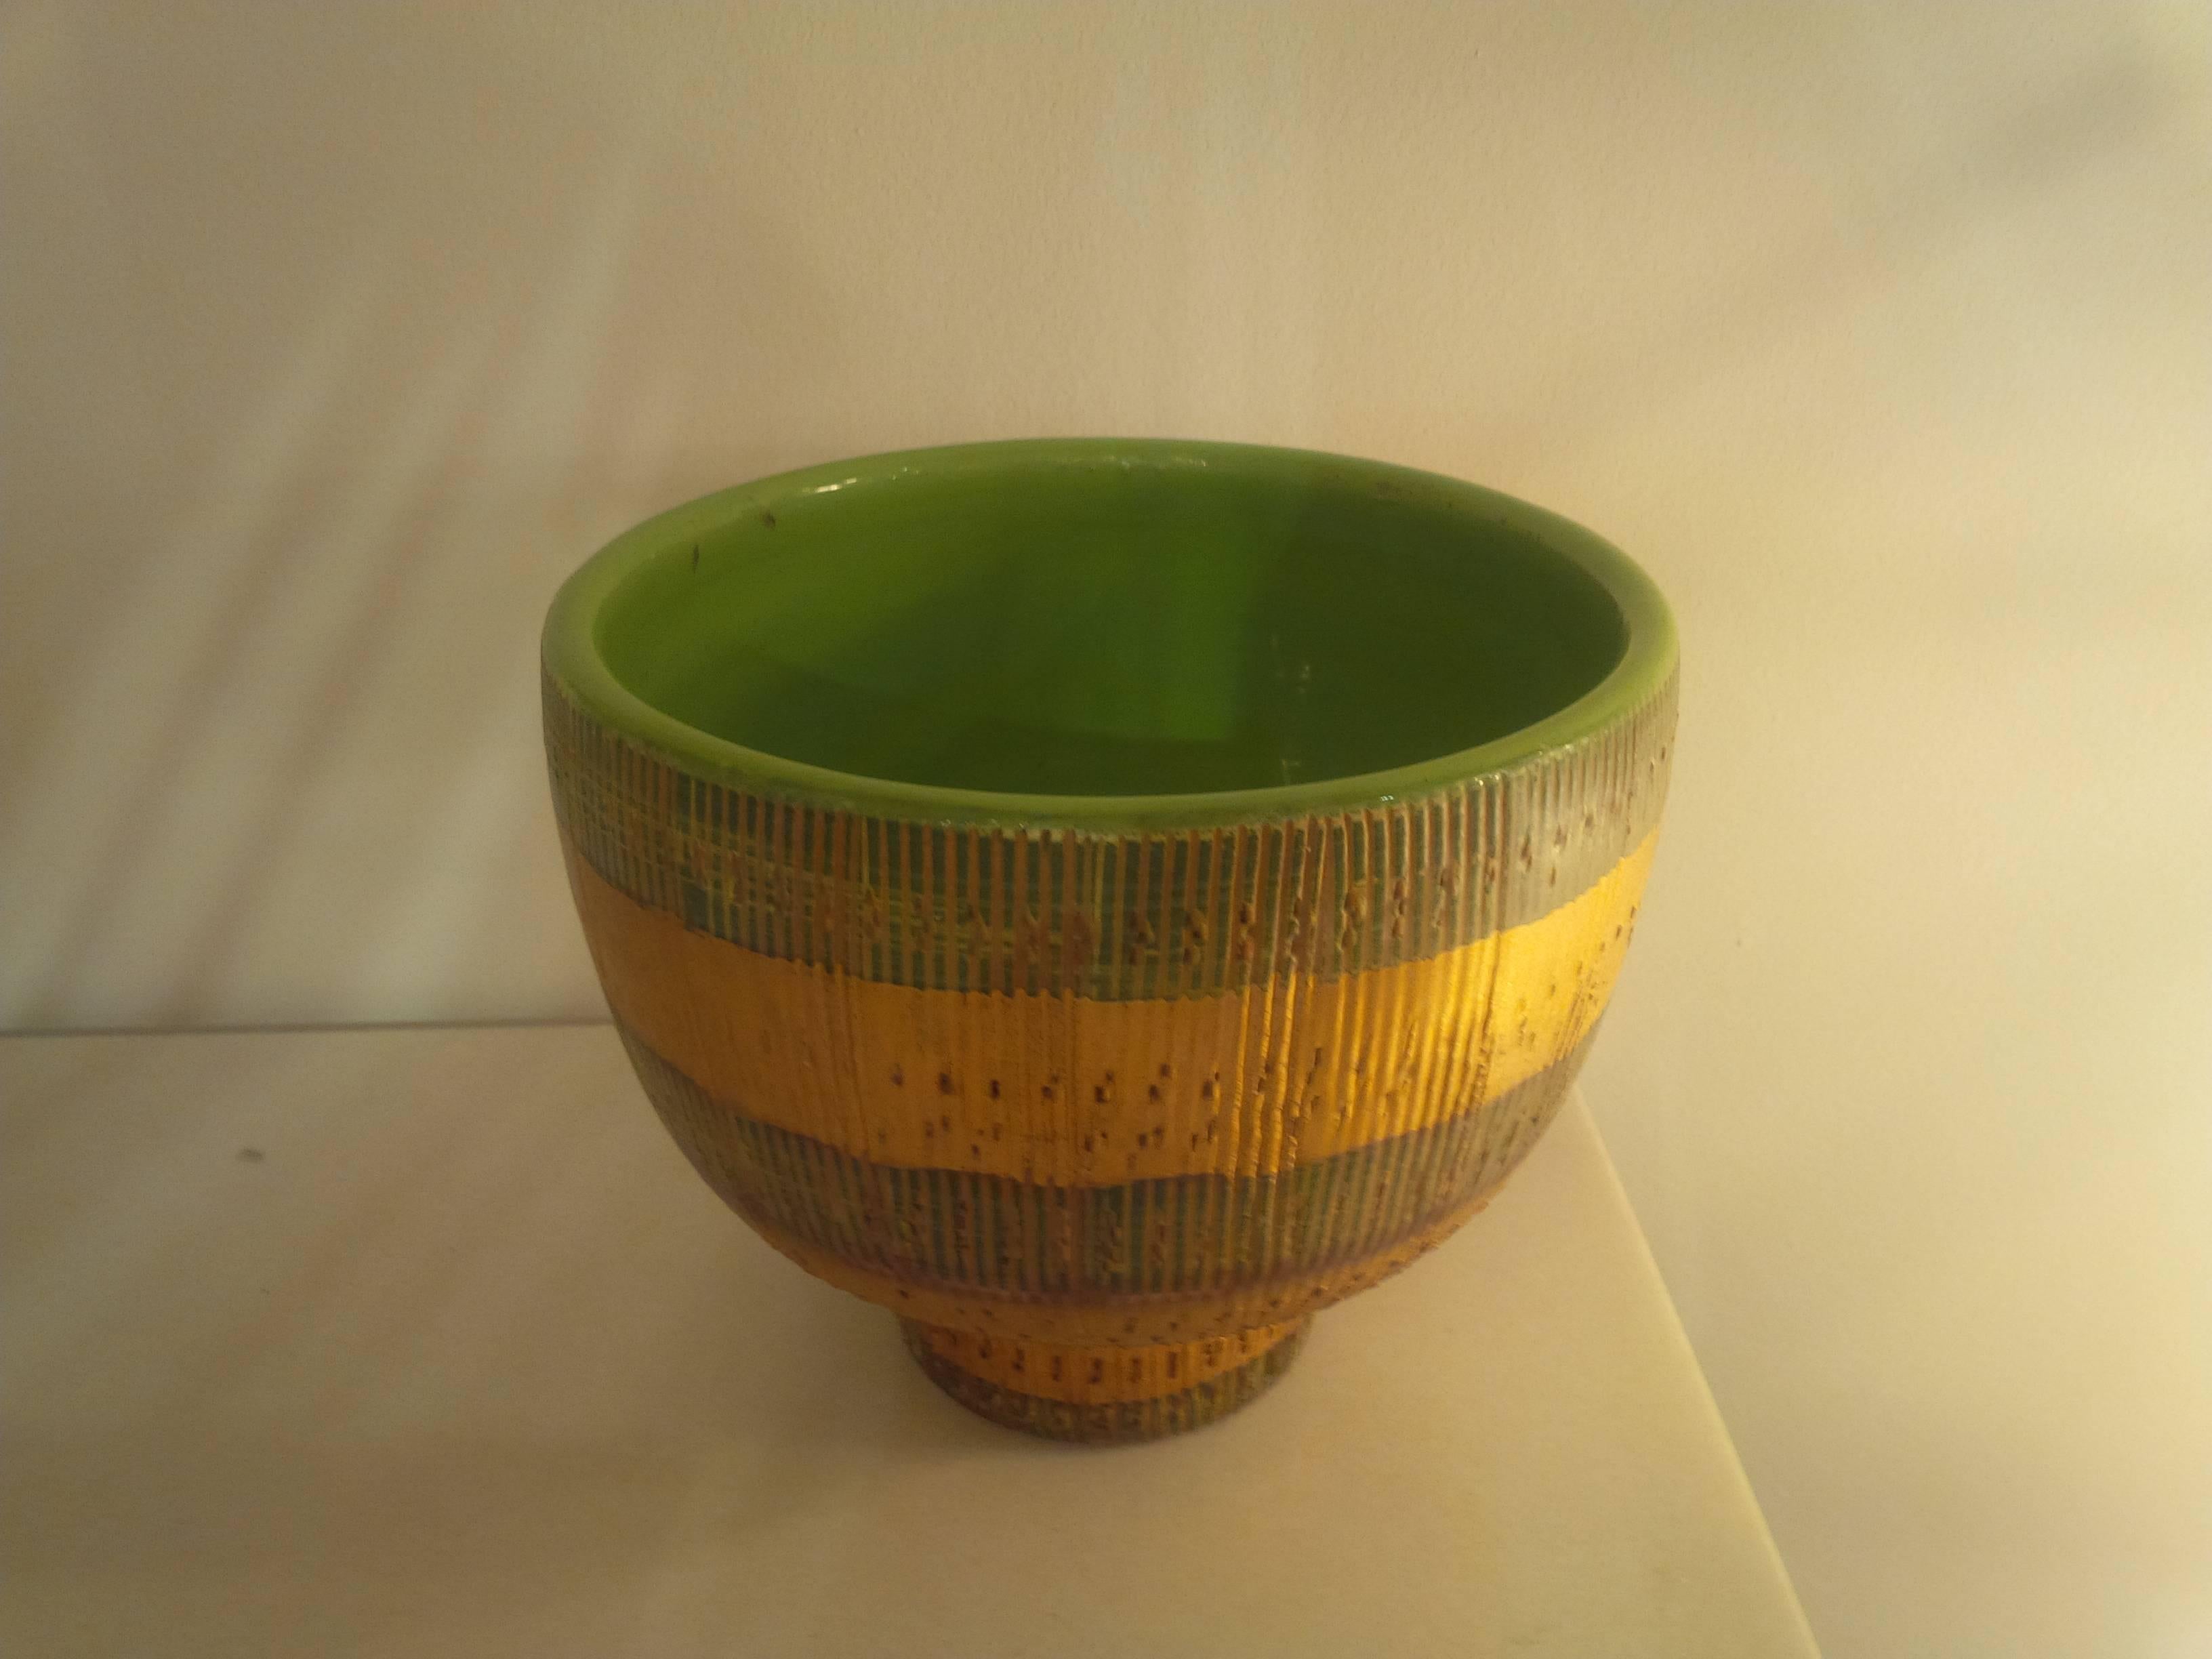 A handmade ceramic rooted bowl or planter by Rymor. Features a sgraffito textured surface with alternating bands of gold and pale green. Signed.